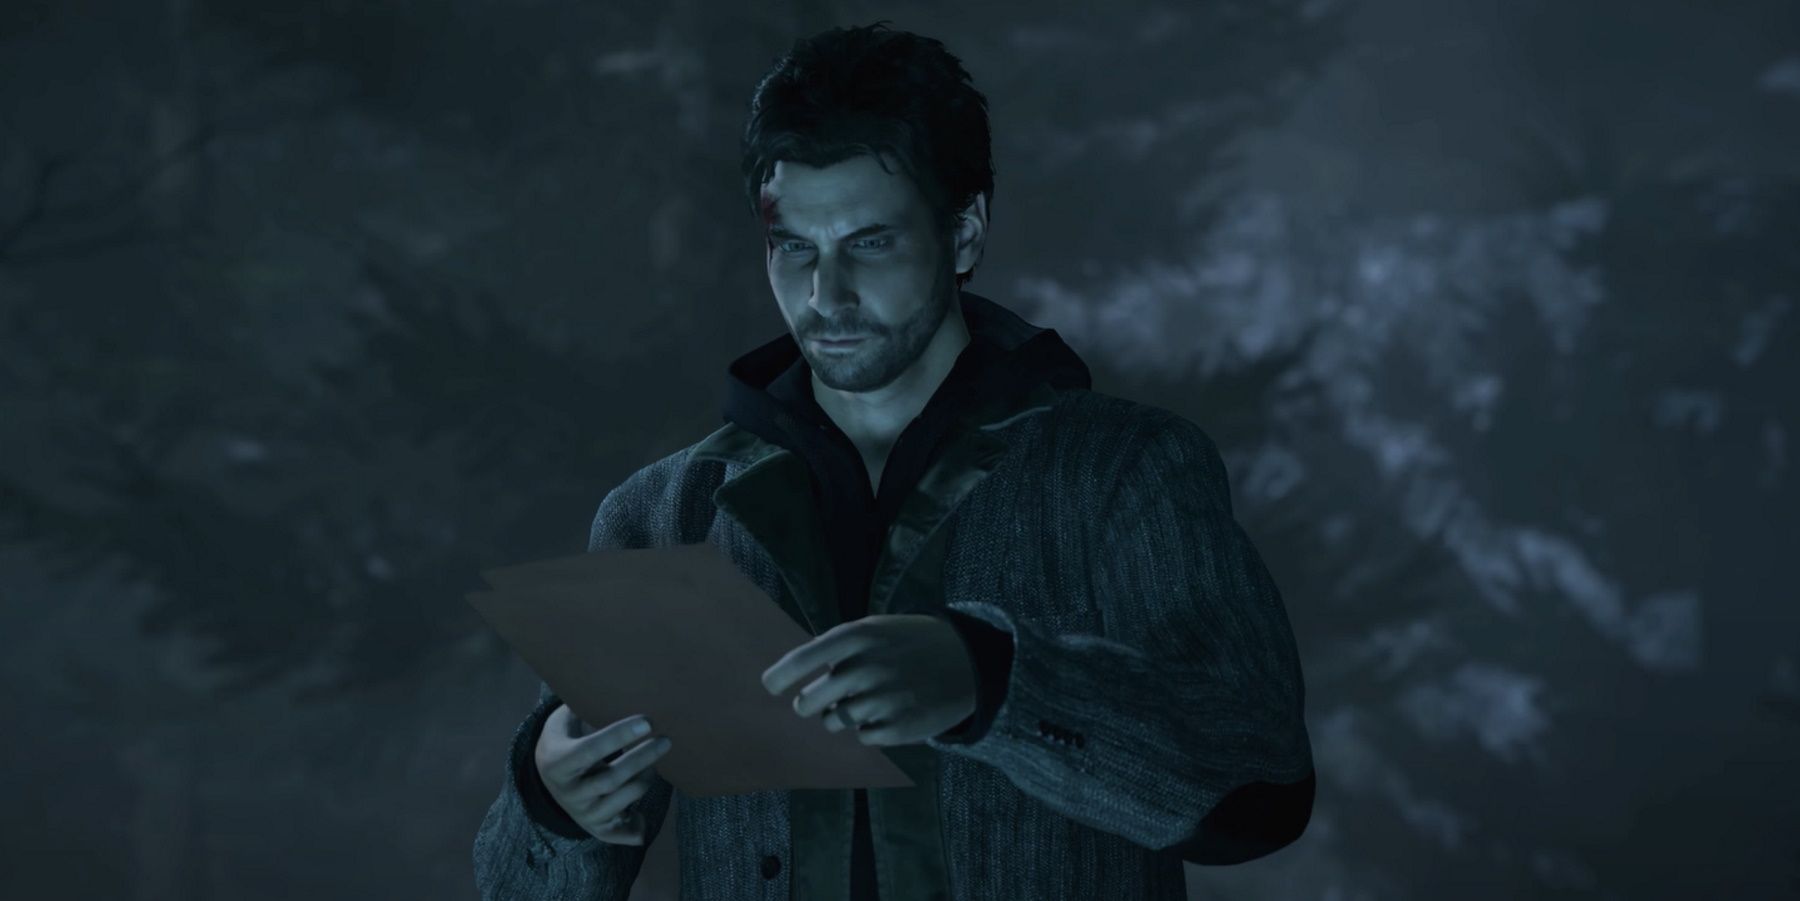 Alan wake reading a manuscript page from his novel Departure